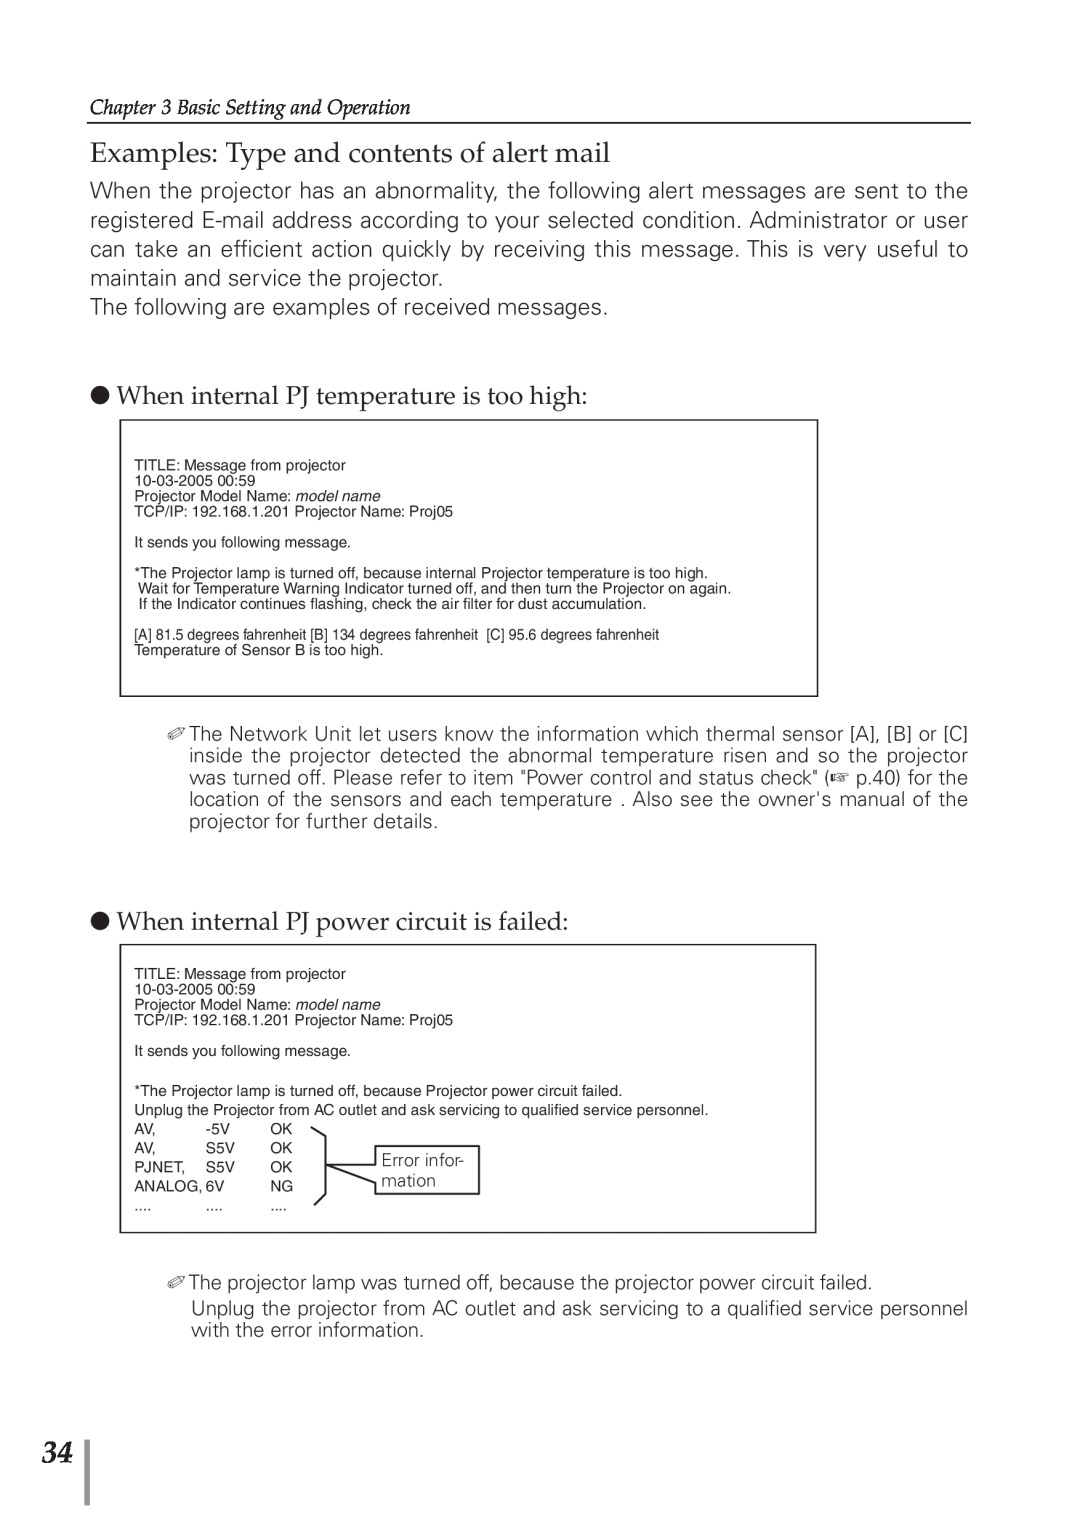 Eiki PJNET-300 owner manual Examples Type and contents of alert mail, When internal PJ temperature is too high 